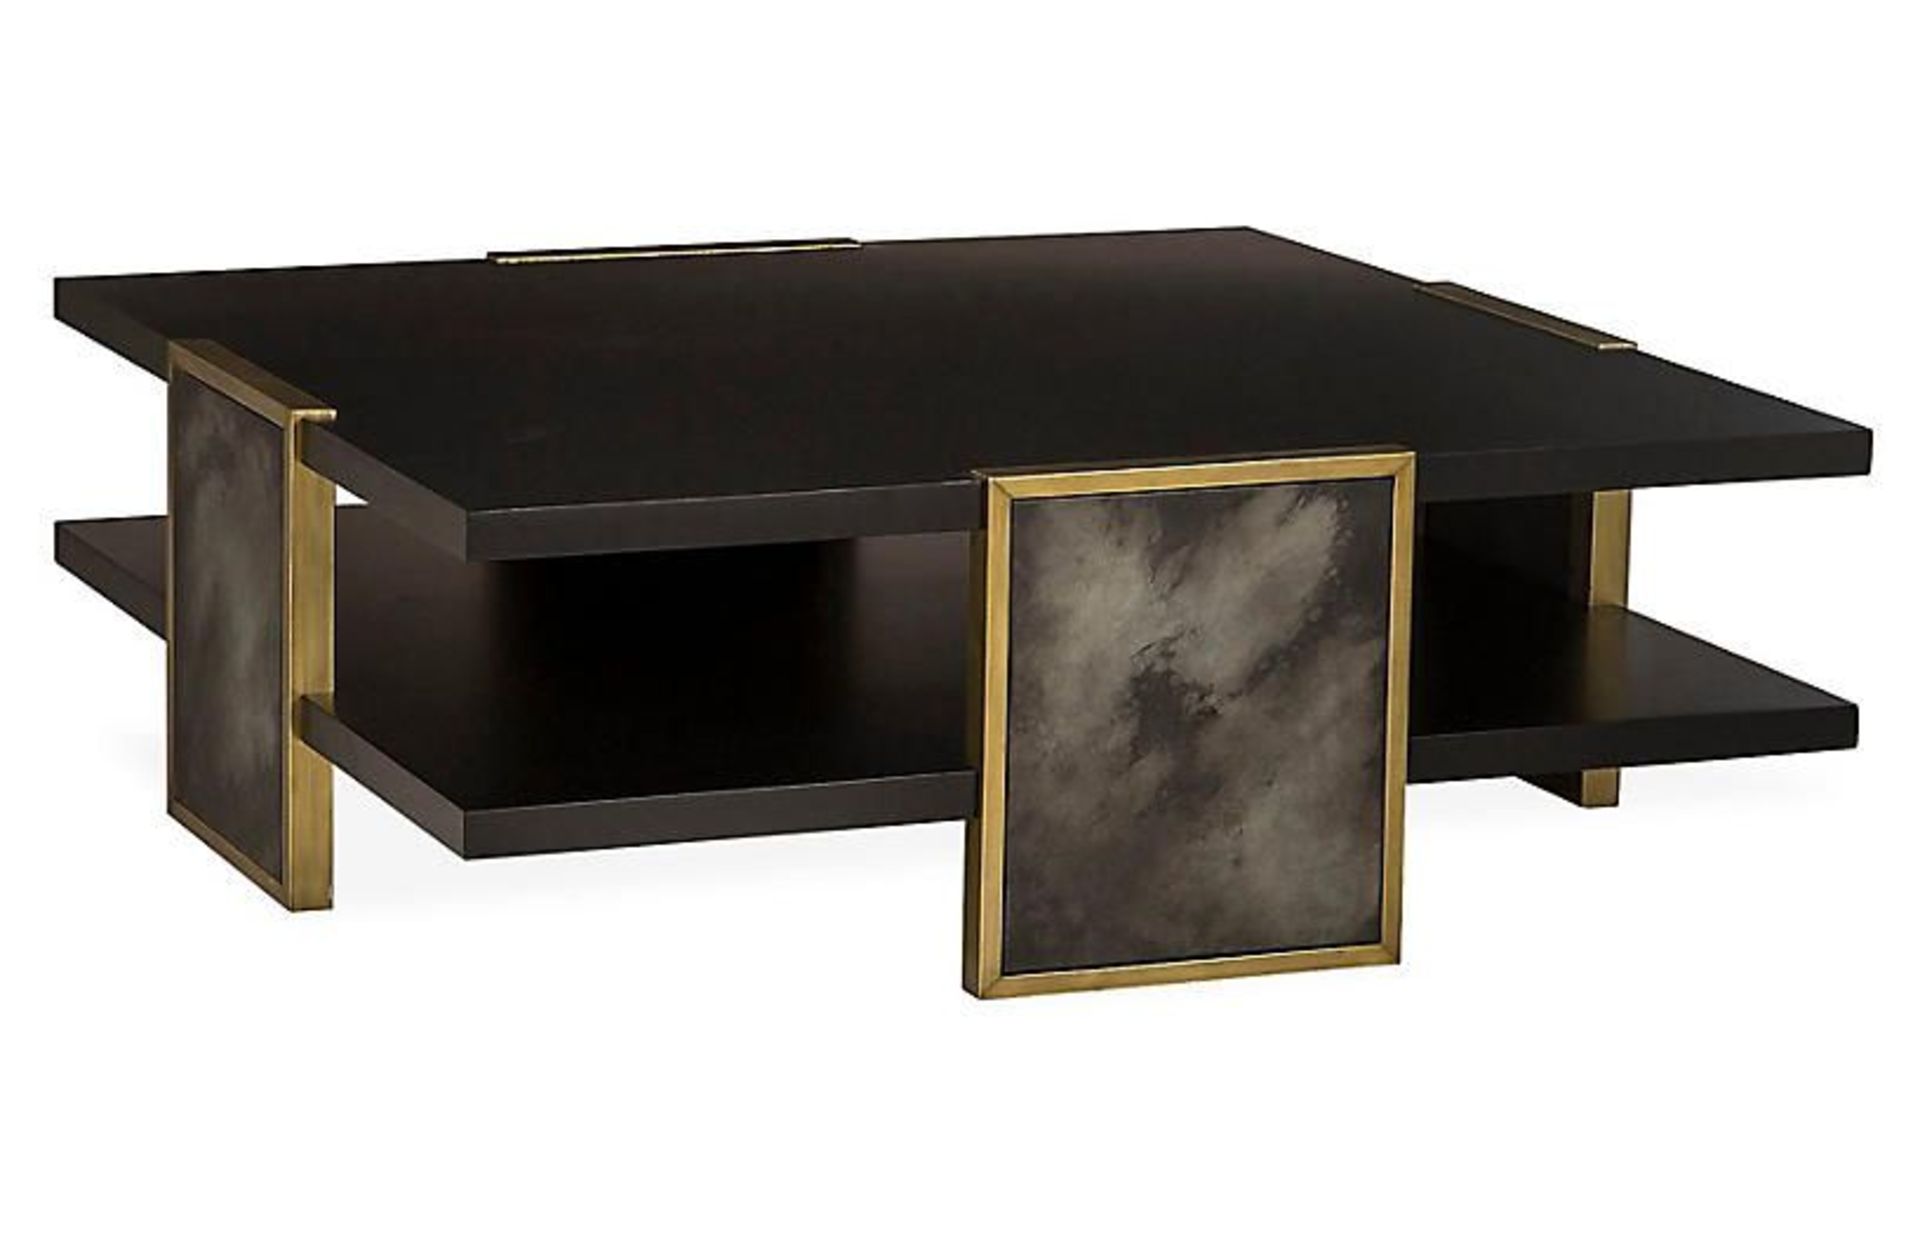 Maison 55 Tables Knox Coffee Table 127 x 127 x 43.2 CM Sure to impress guests, this coffee table